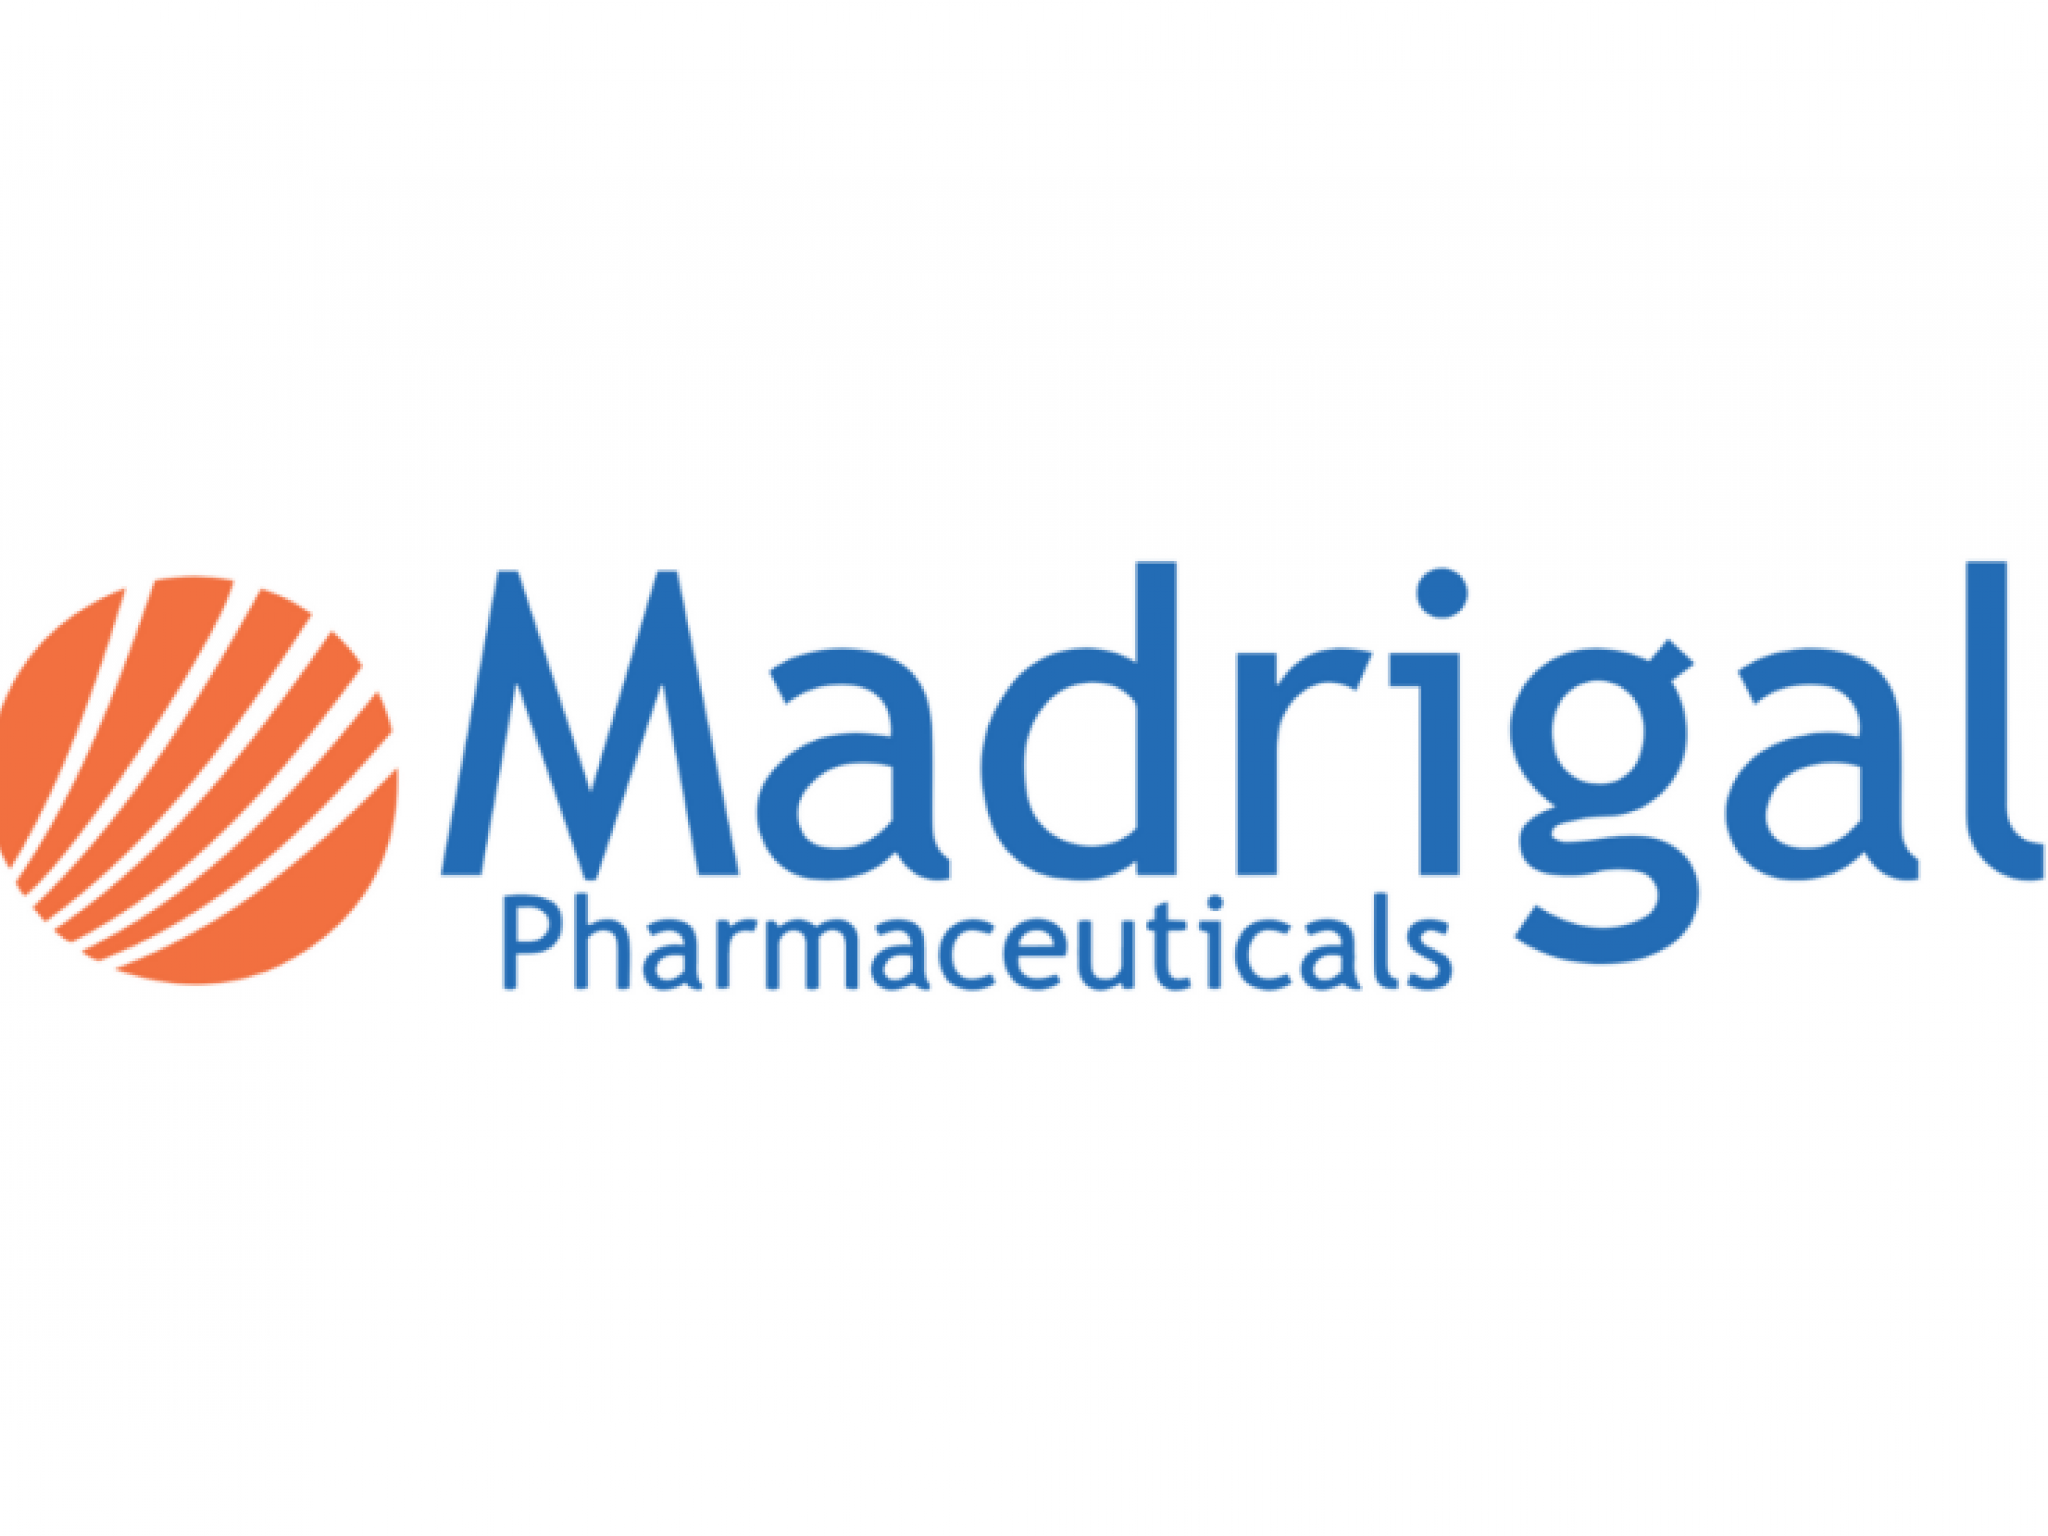  whats-going-on-with-fattly-liver-disease-focused-madrigal-pharmaceuticals-sagimet-biosciences-shares-on-wednesday 